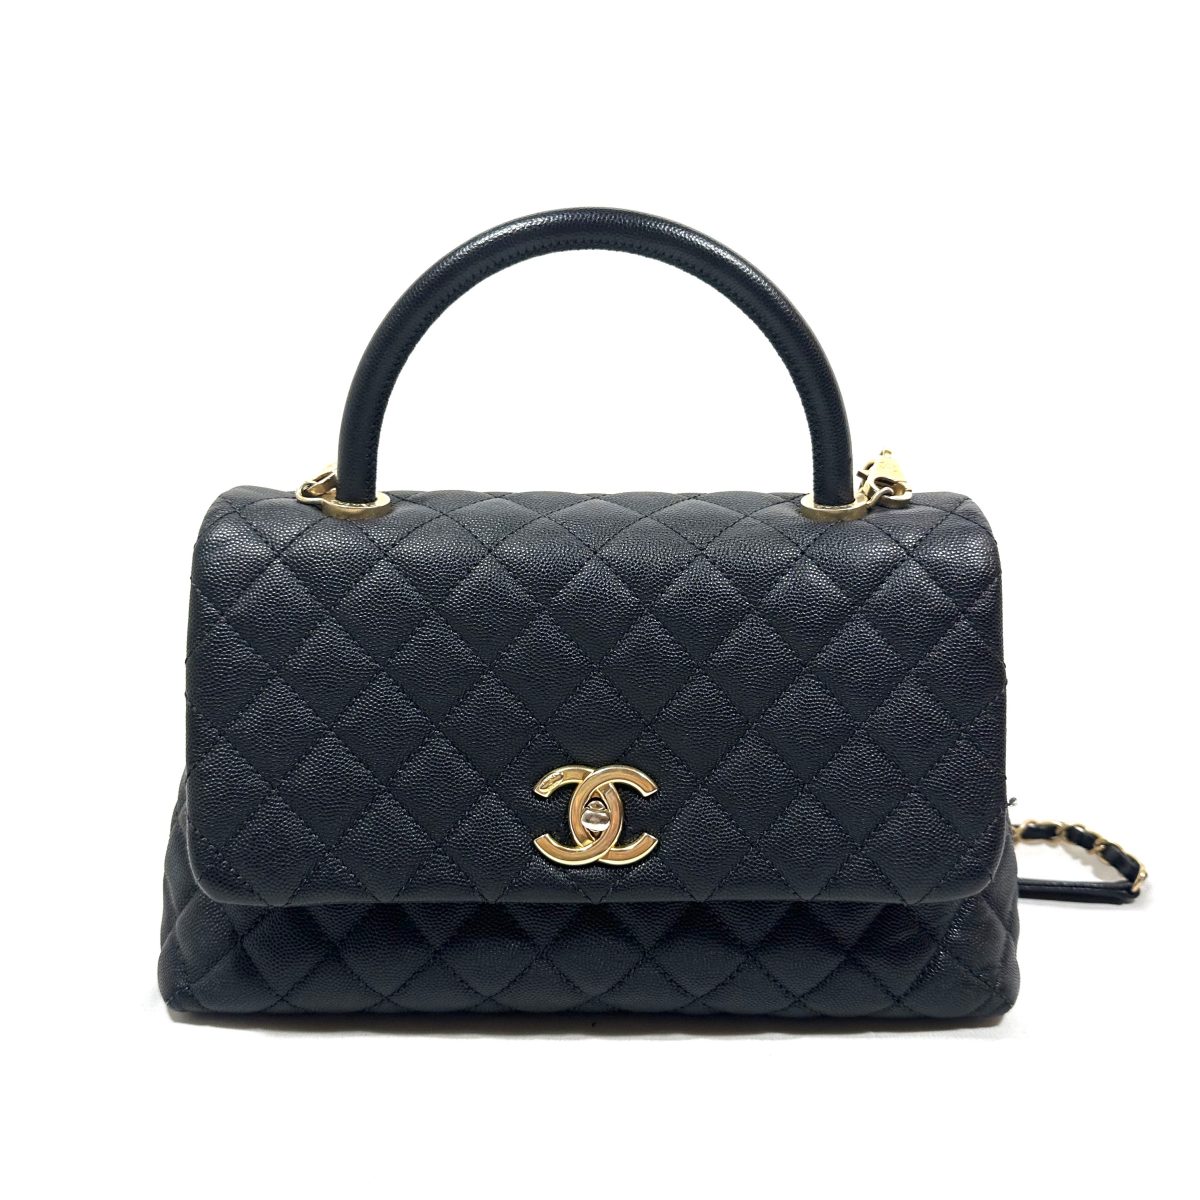 Chanel preloved bags